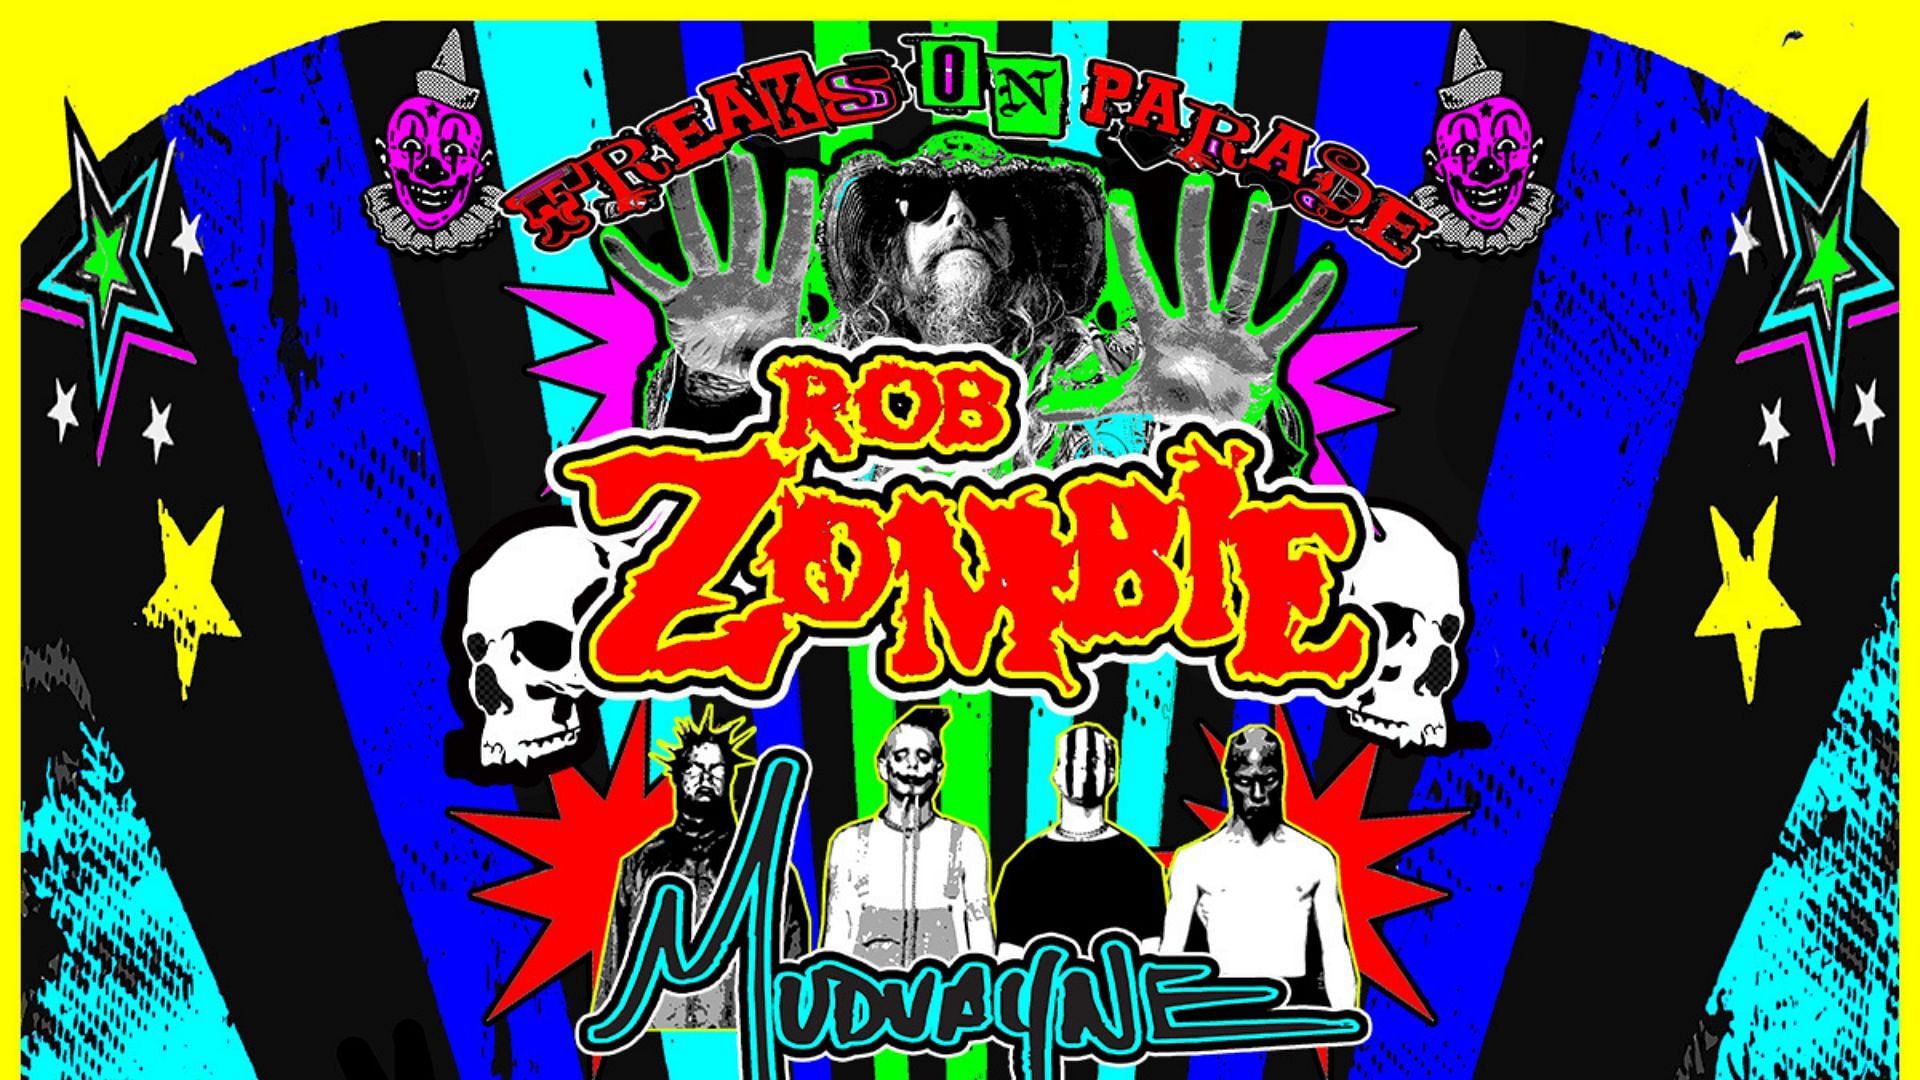 Rob Zombie Freaks on Parade tour 2022 tickets Presale, where to buy